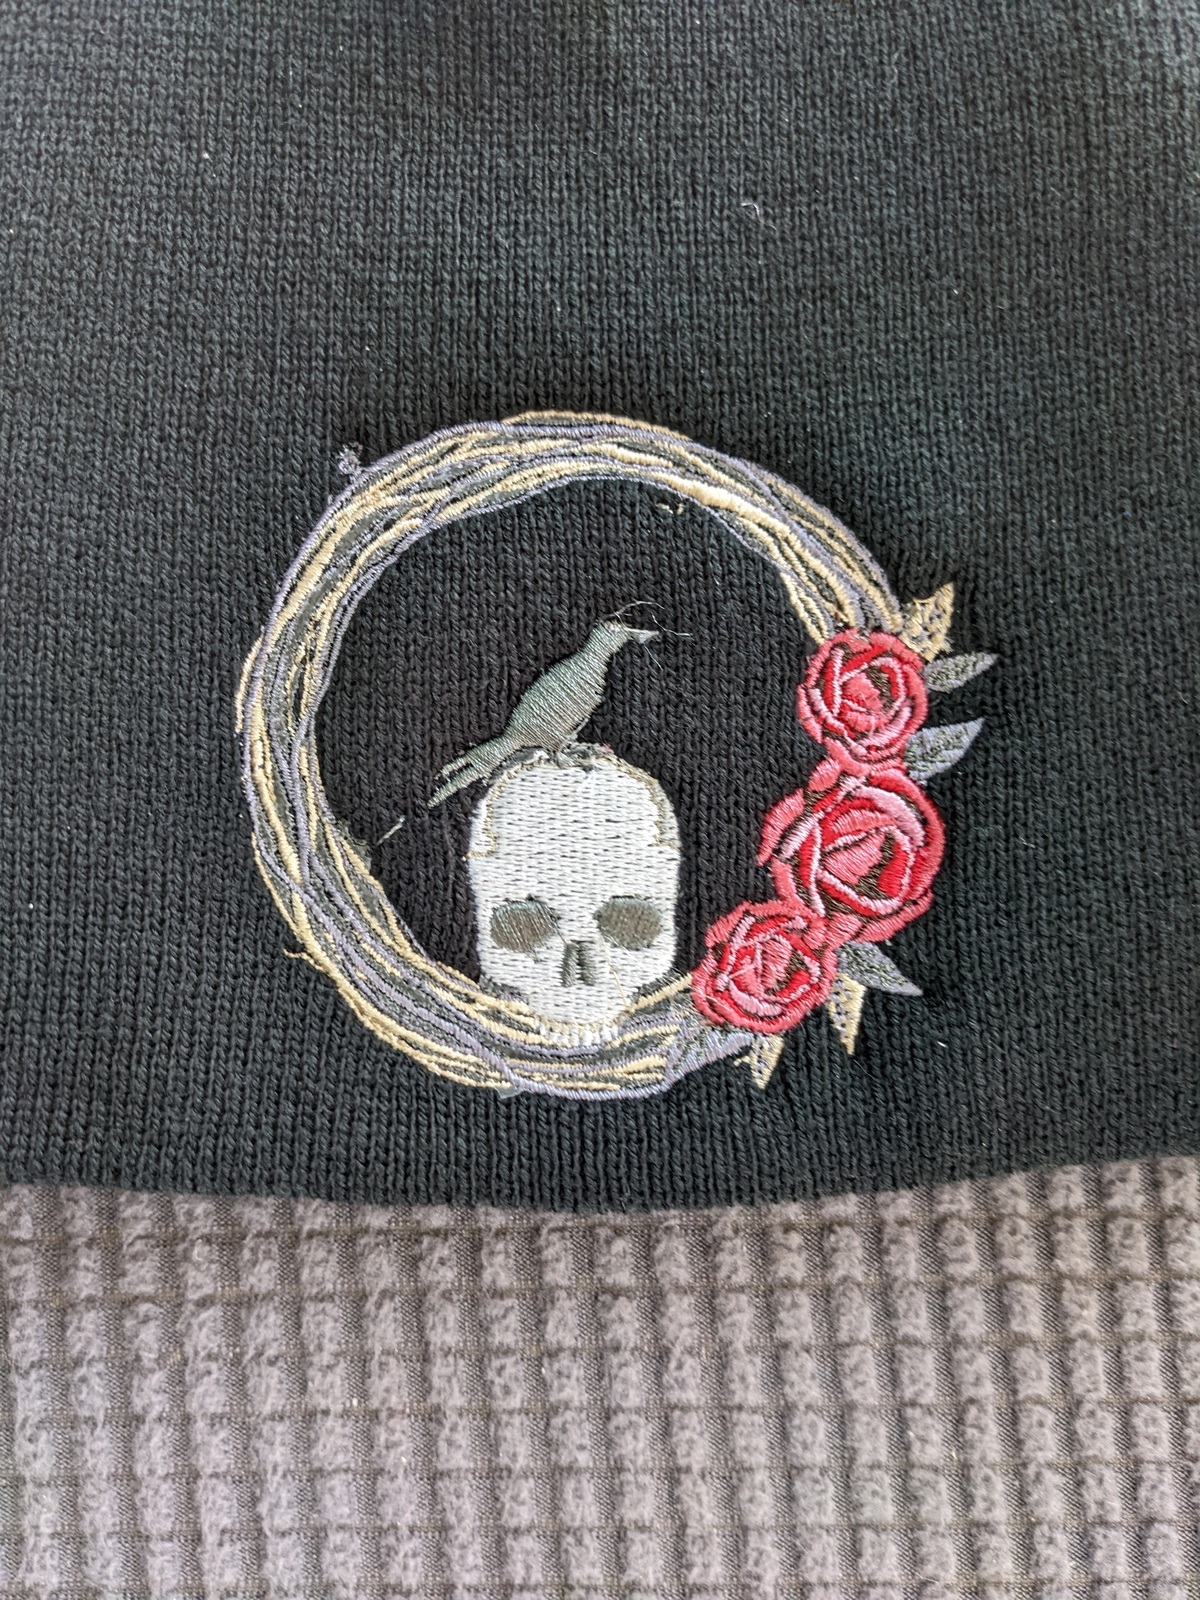 Primary image for Embroidered skull beanie. goth beanie, bird beanie, skull hat, goth hat,skeleton